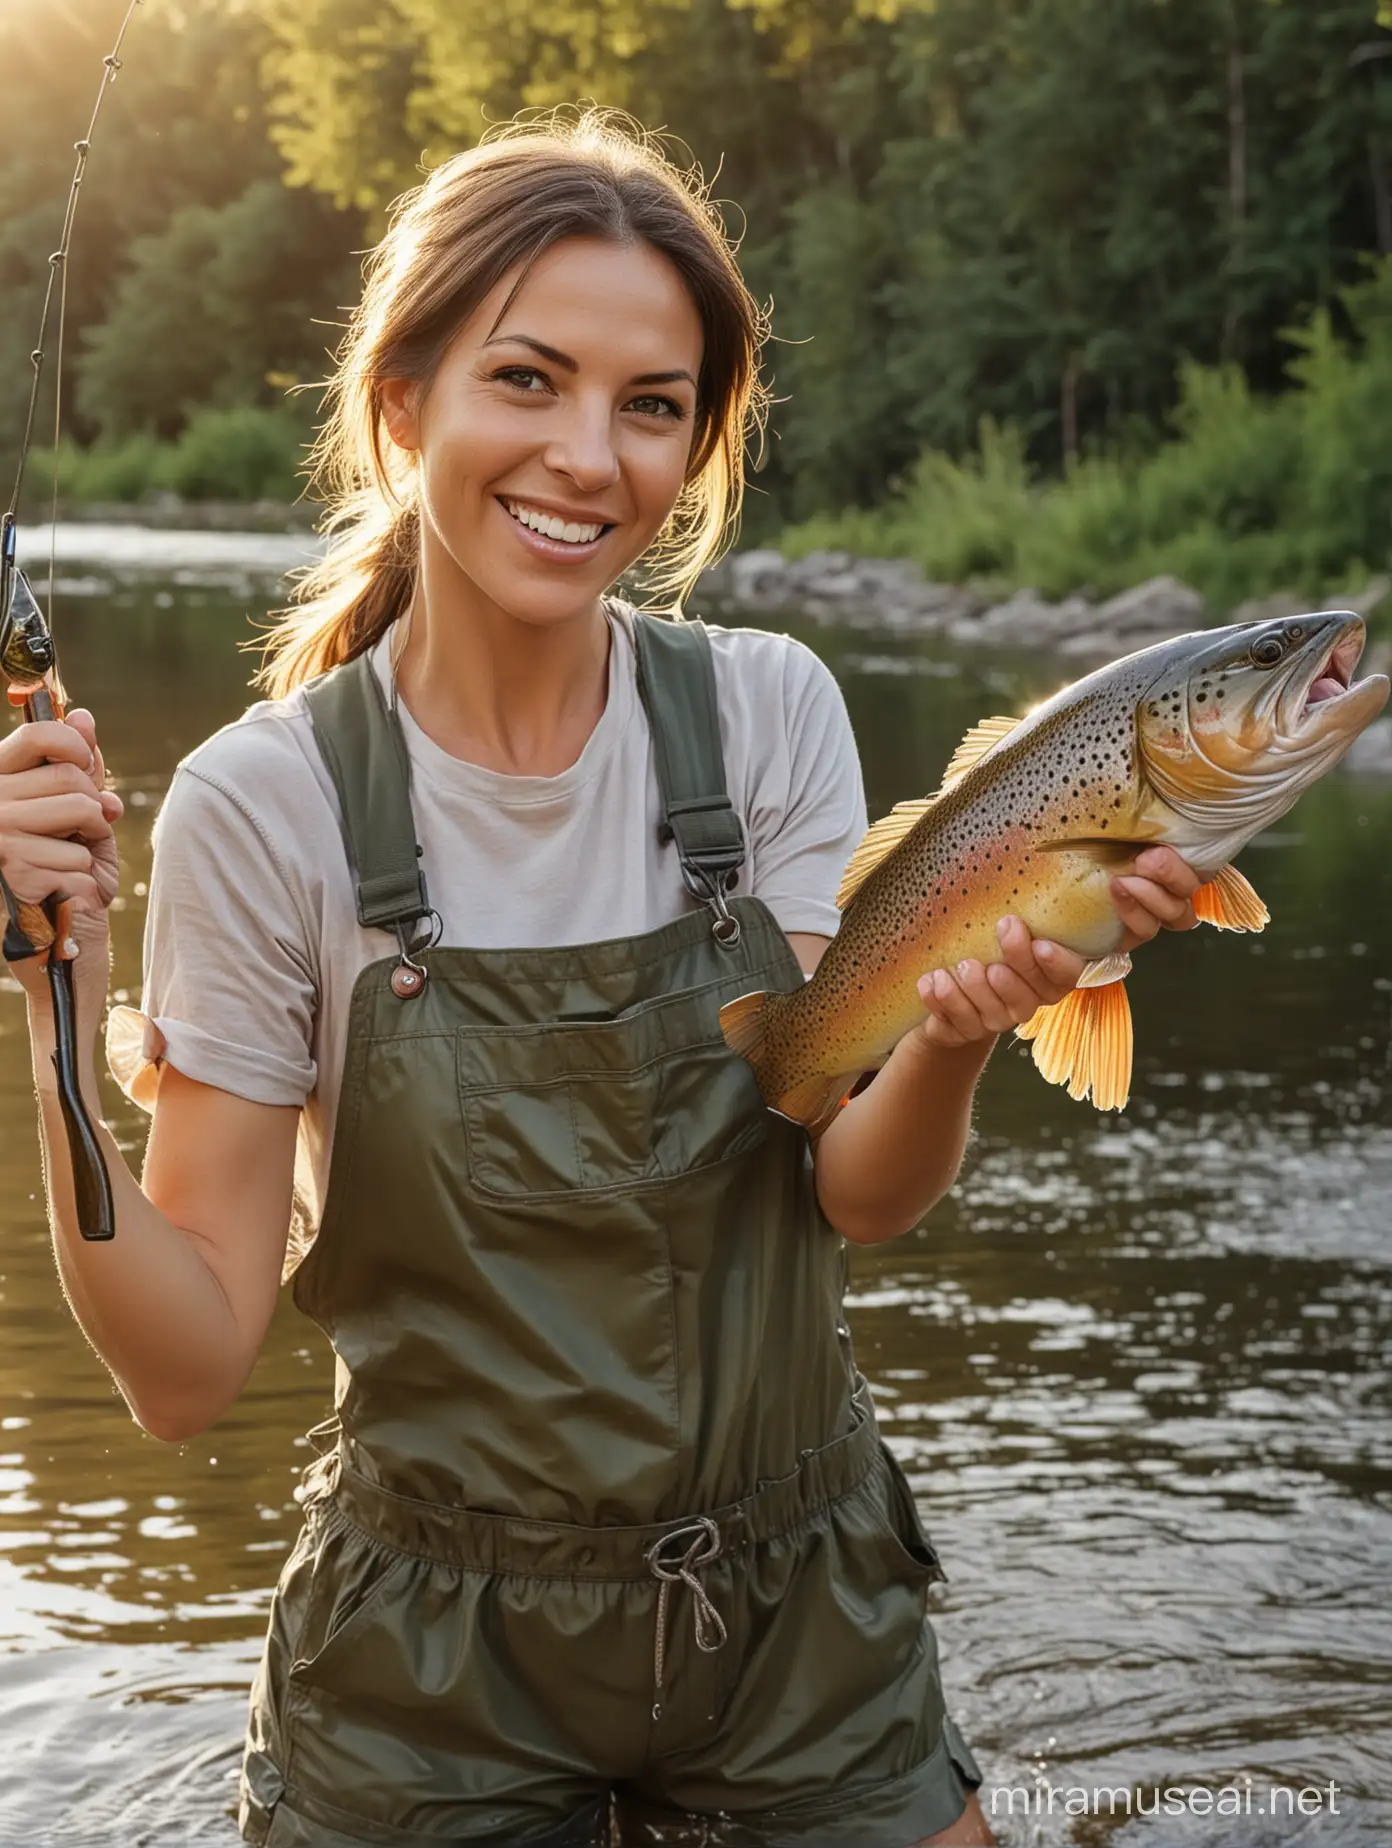 Caucasian 35 years old woman as happy fisherwoman, caught a trout fish, portrait with happy expressions, holding up caught a big fish on hook, wearing small top and shorts, looking straight to camera, river and forest in the background, sunrise, ultra realistic photograph, vivid colors